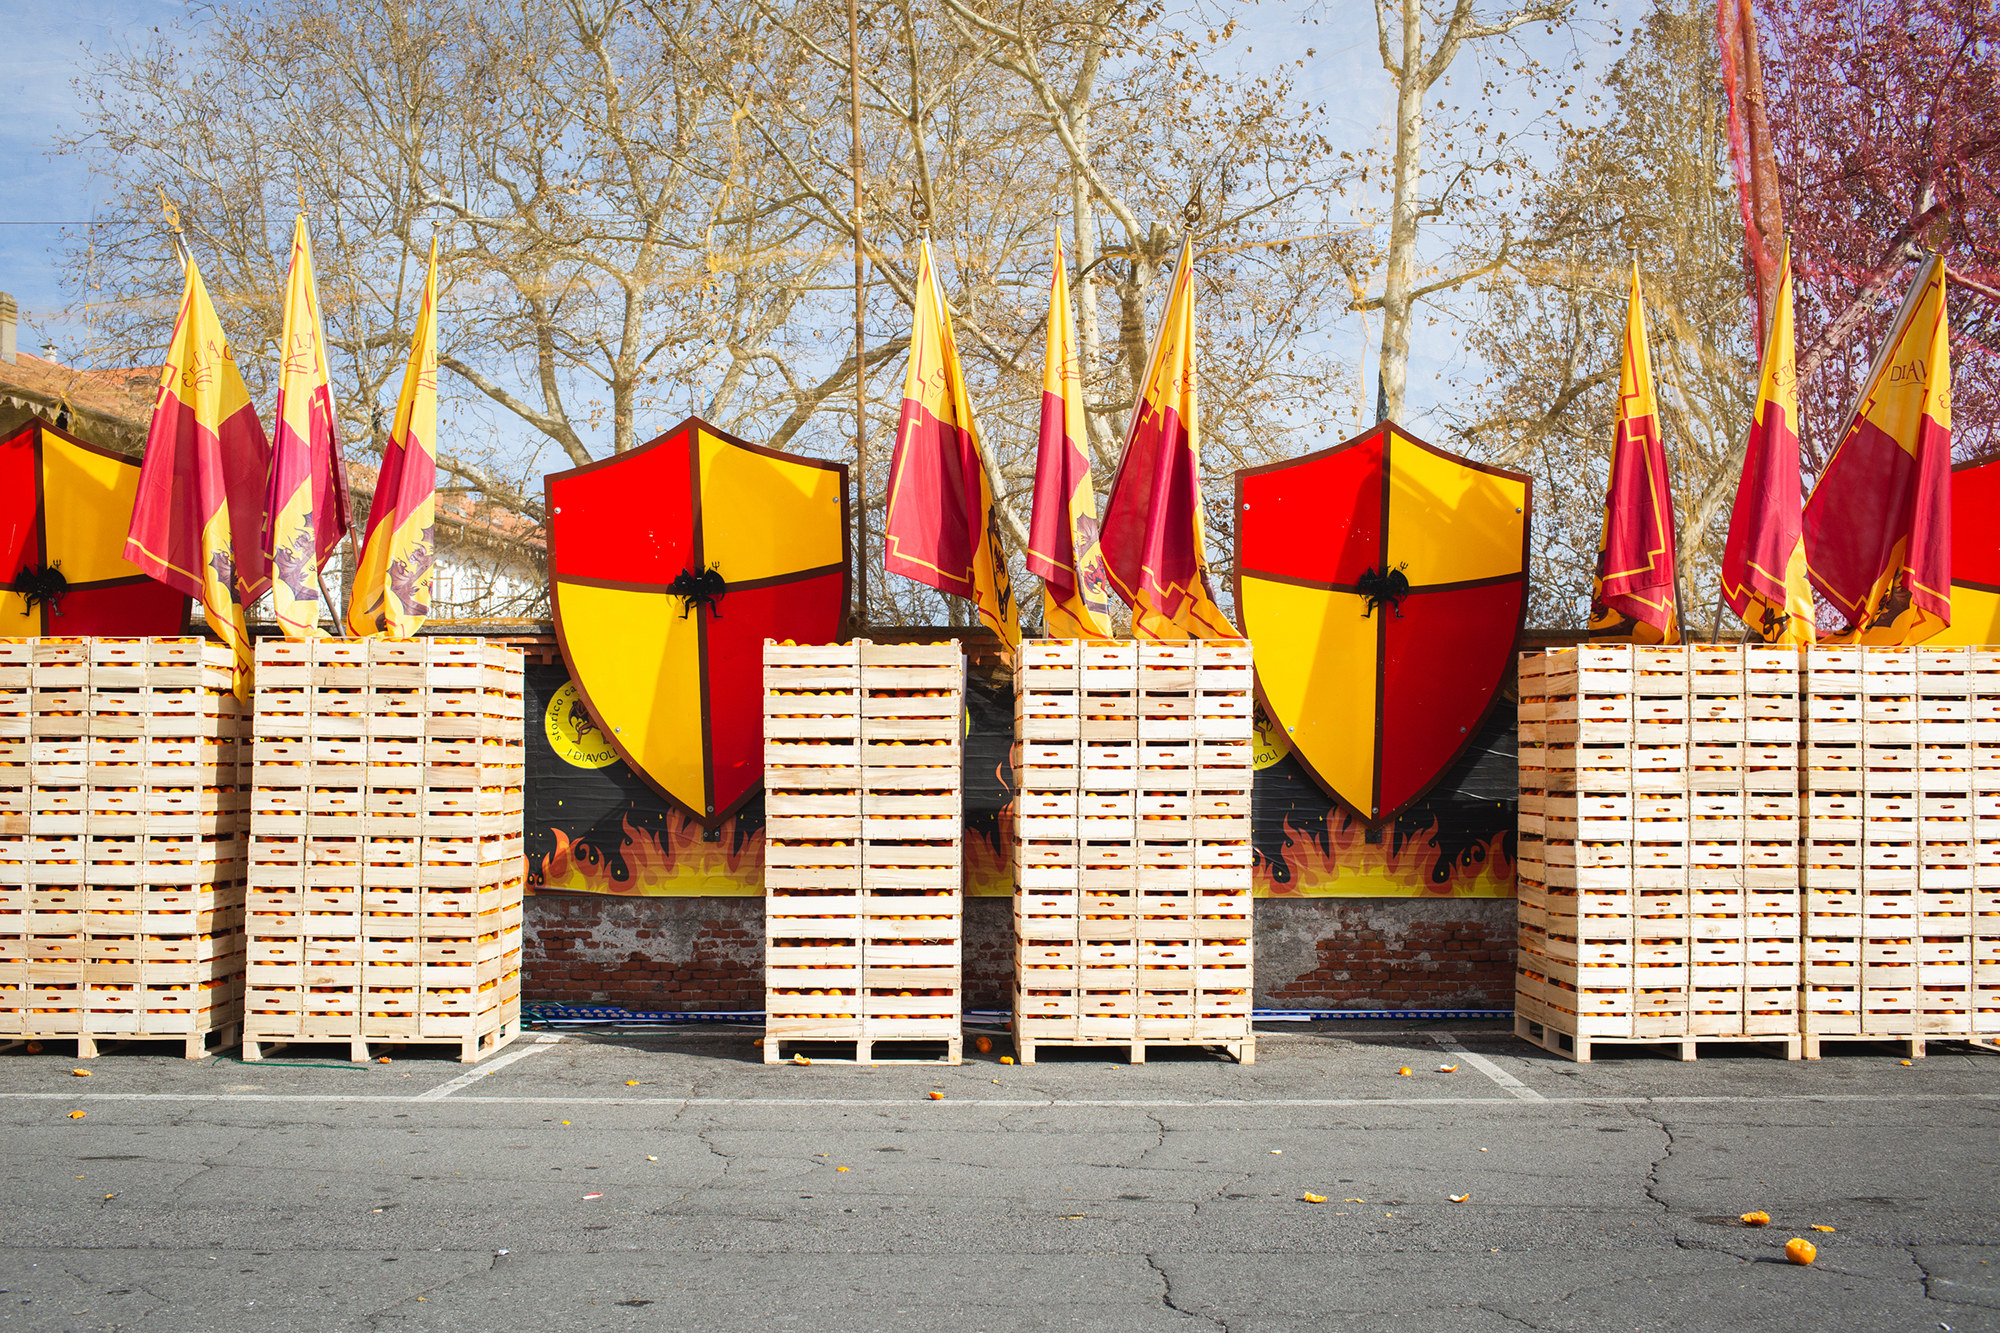 Six tall, vertical stacks of wooden crates of oranges sit in a parking lot in front of a coat of arms and flags depicting the team&#x27;s colors